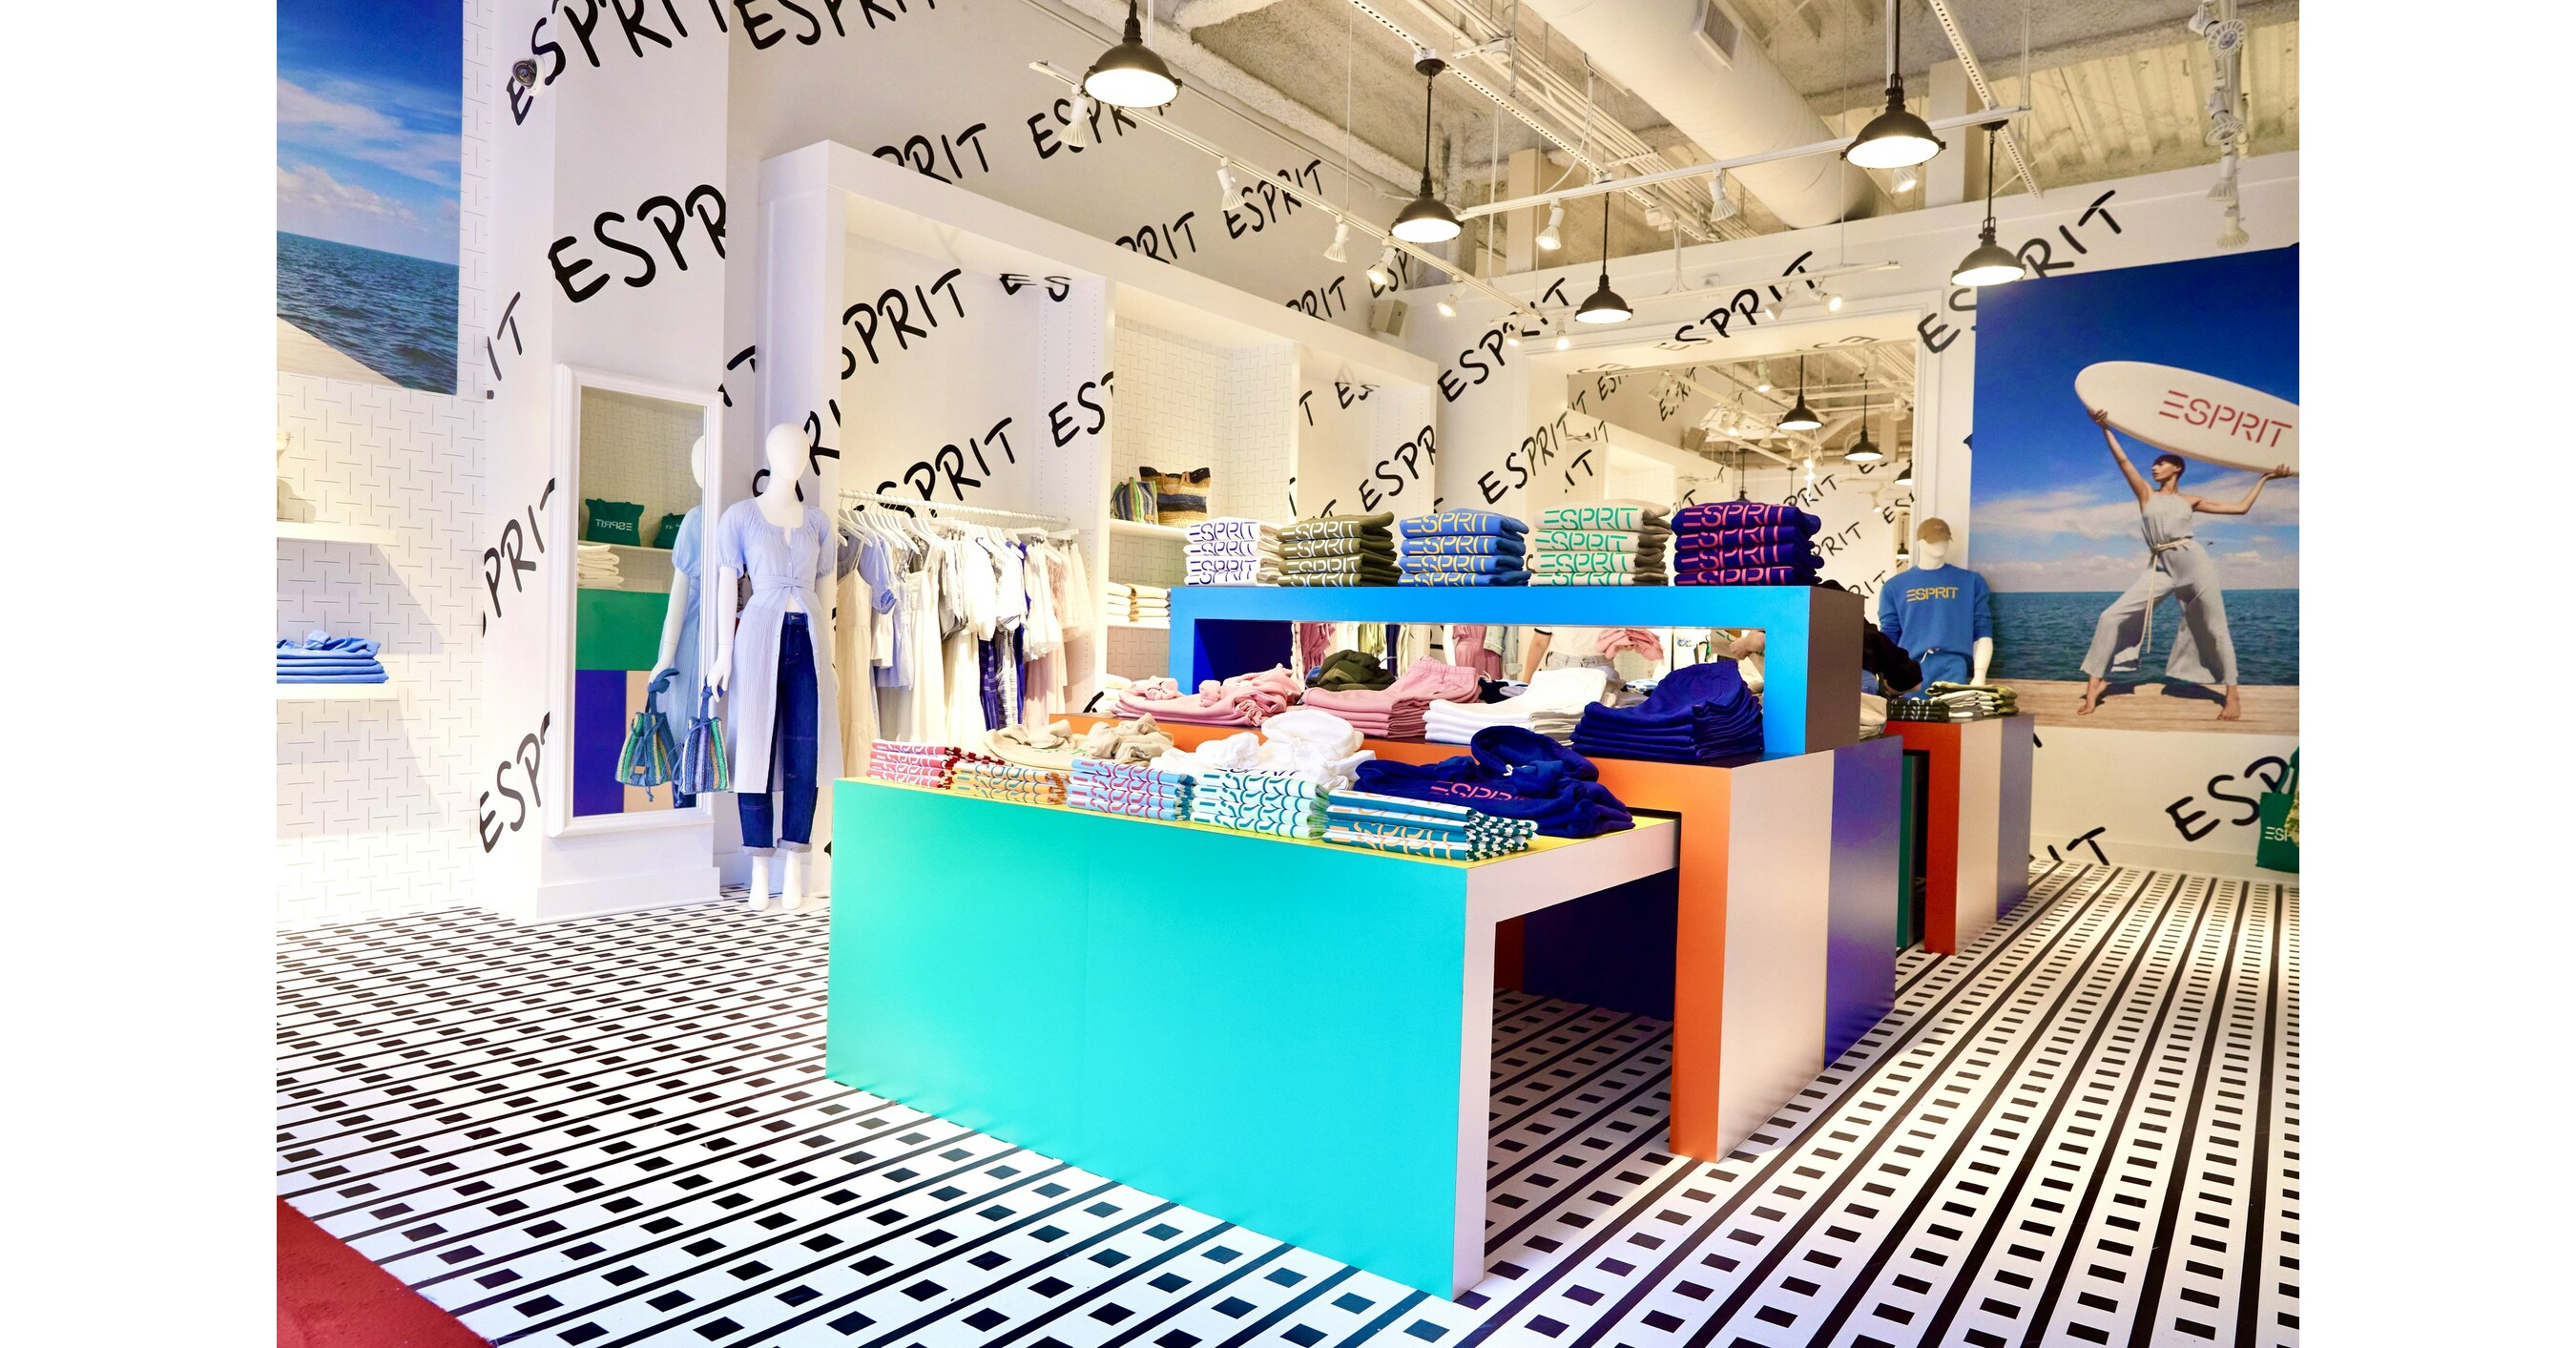 Esprit opens its first pop-up clothing shop in Los Angeles - L.A.